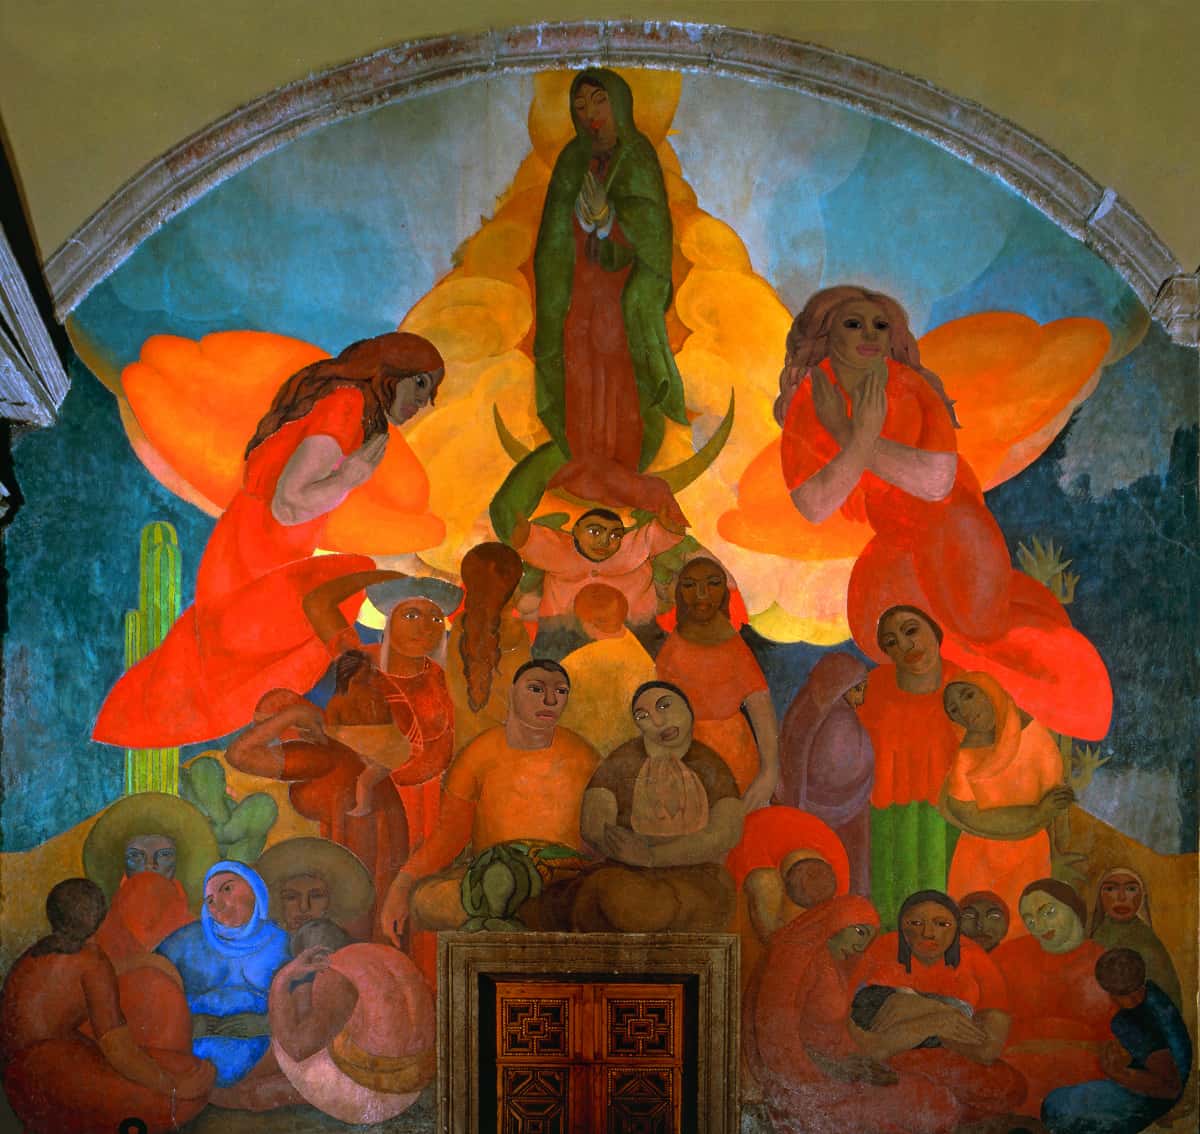 Mural Allegory of the Virgin of Guadalupe by Fermín Revueltas